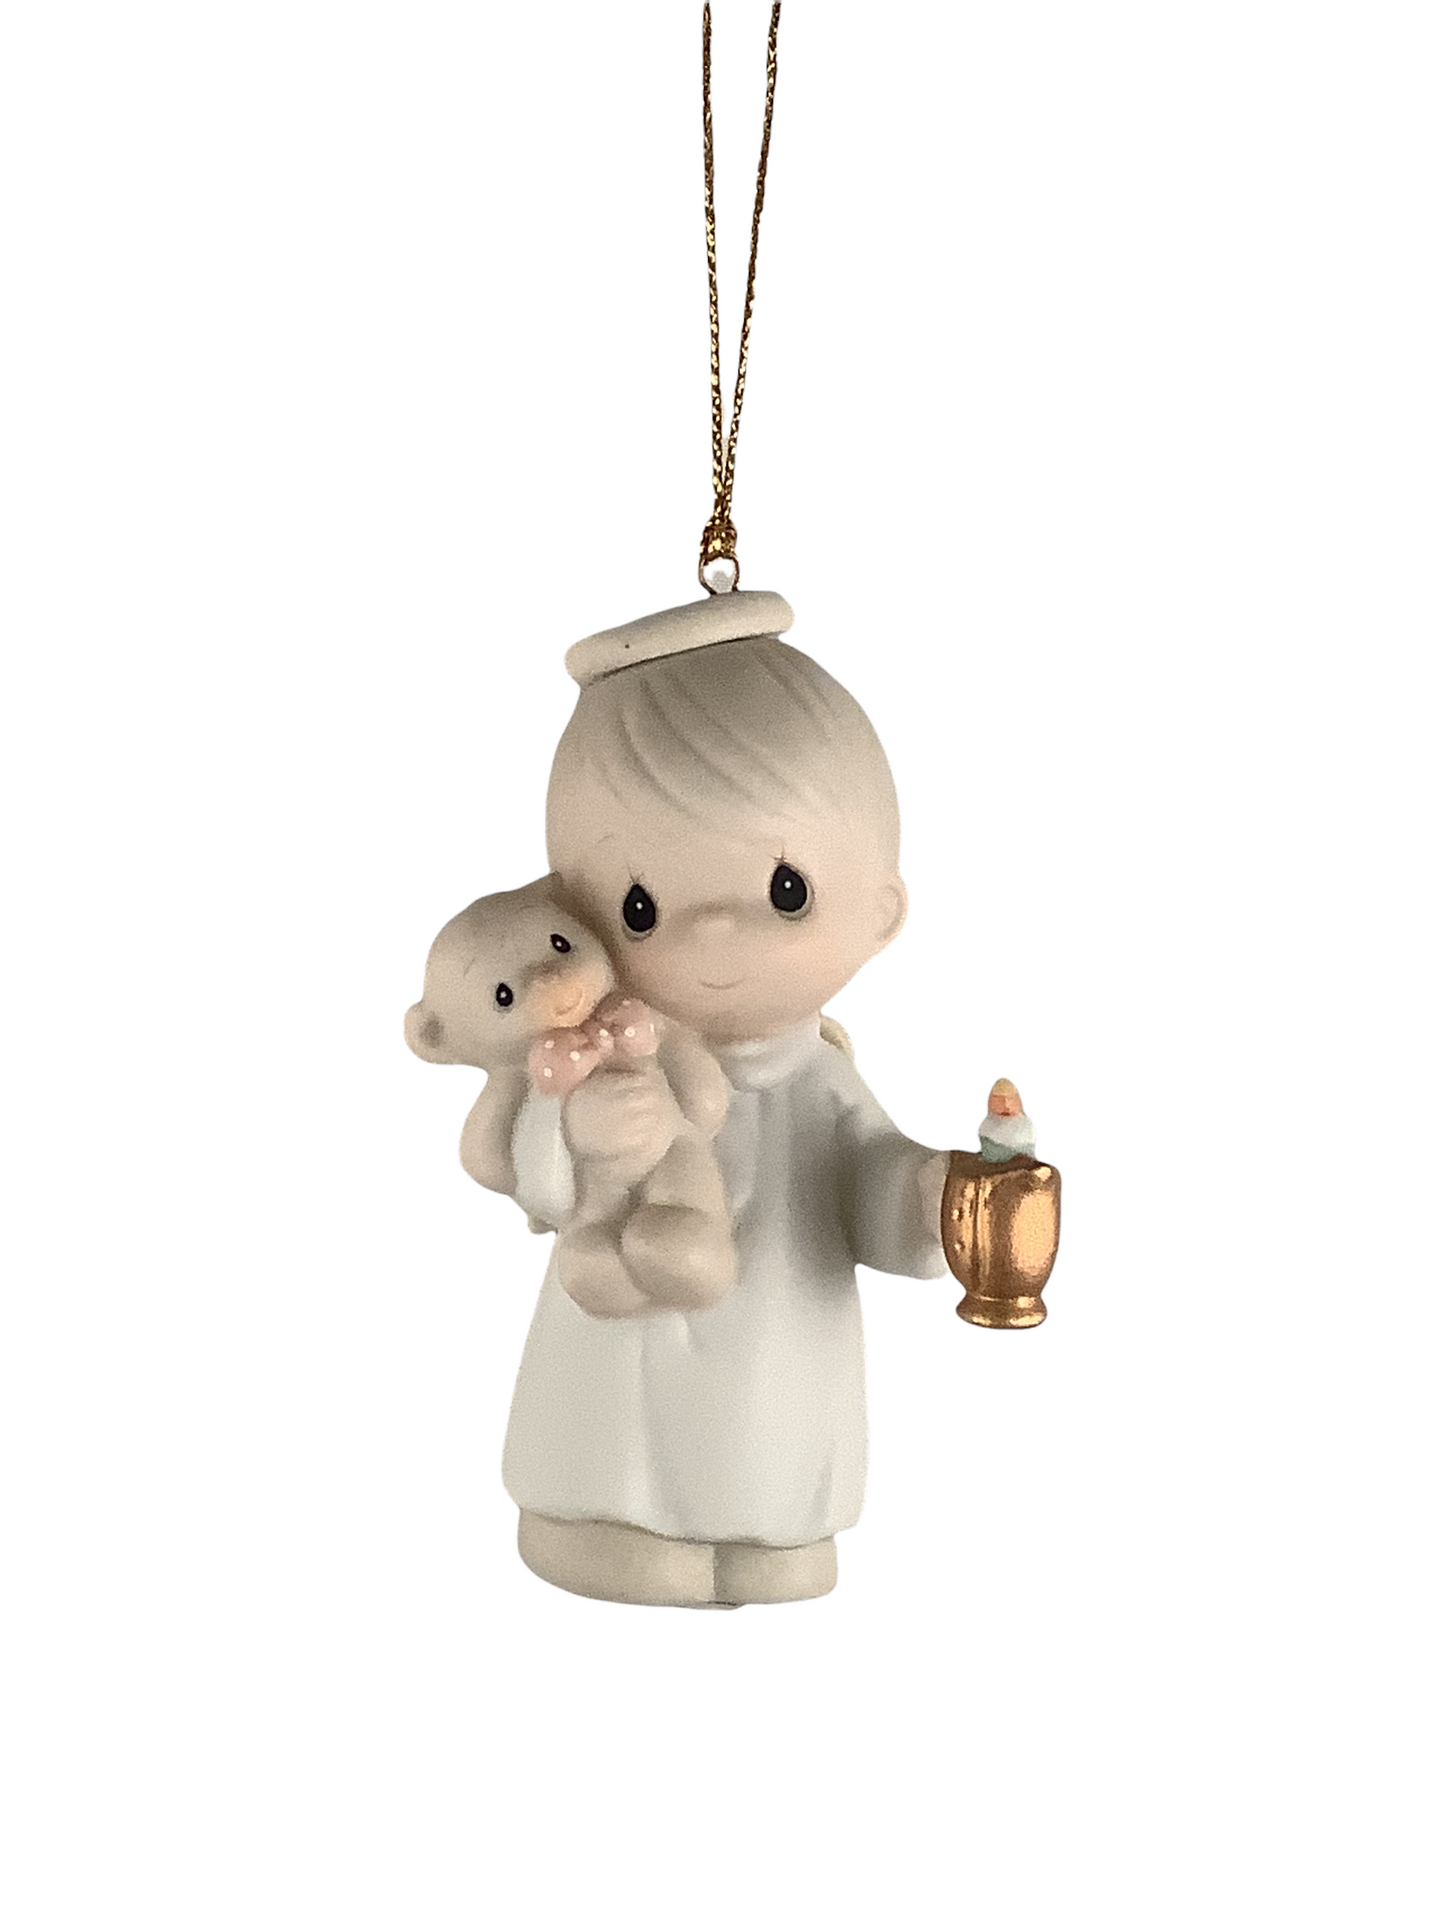 Lighting The Way To A Happy Holiday - Precious Moment Ornament